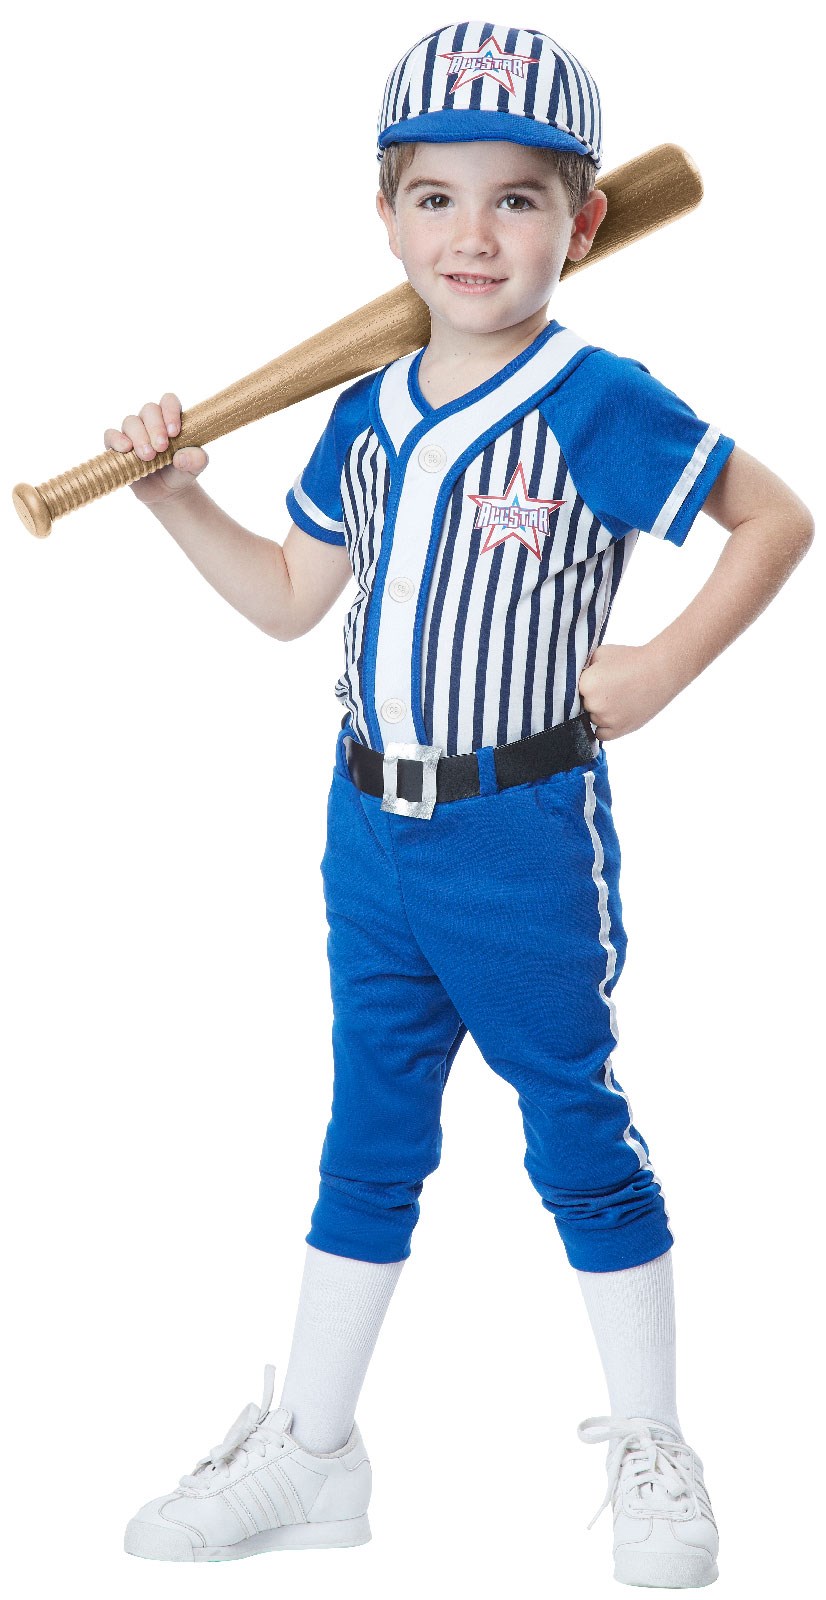 Boys Baseball Player Costume For Toddlers